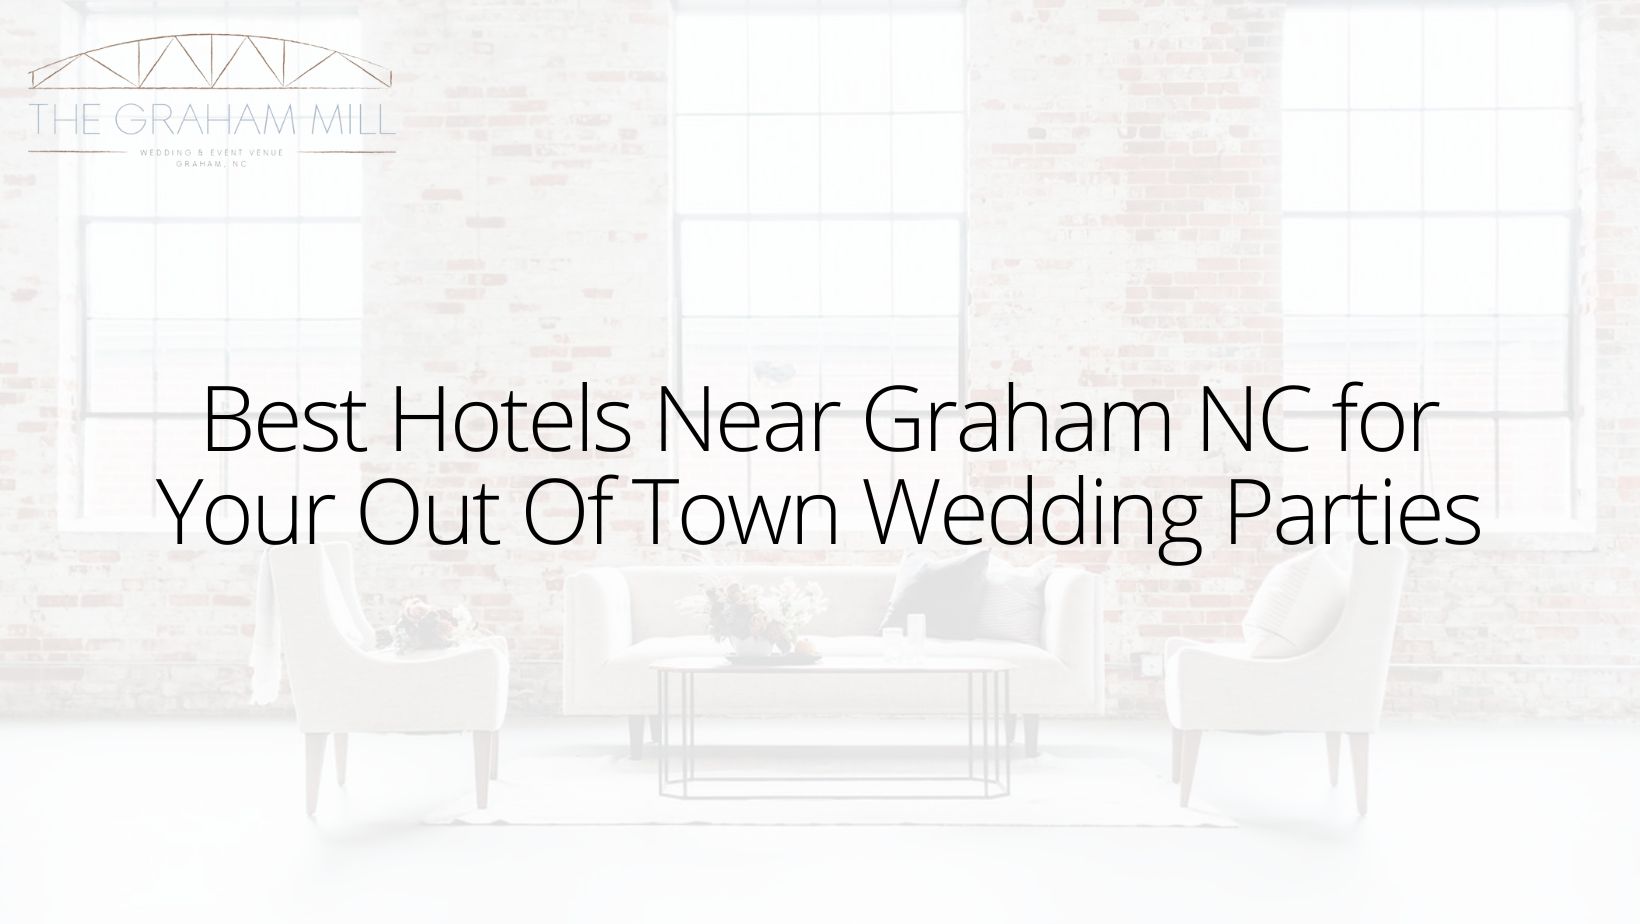 Hotels for Your Out Of Town Wedding Parties – Near Graham NC